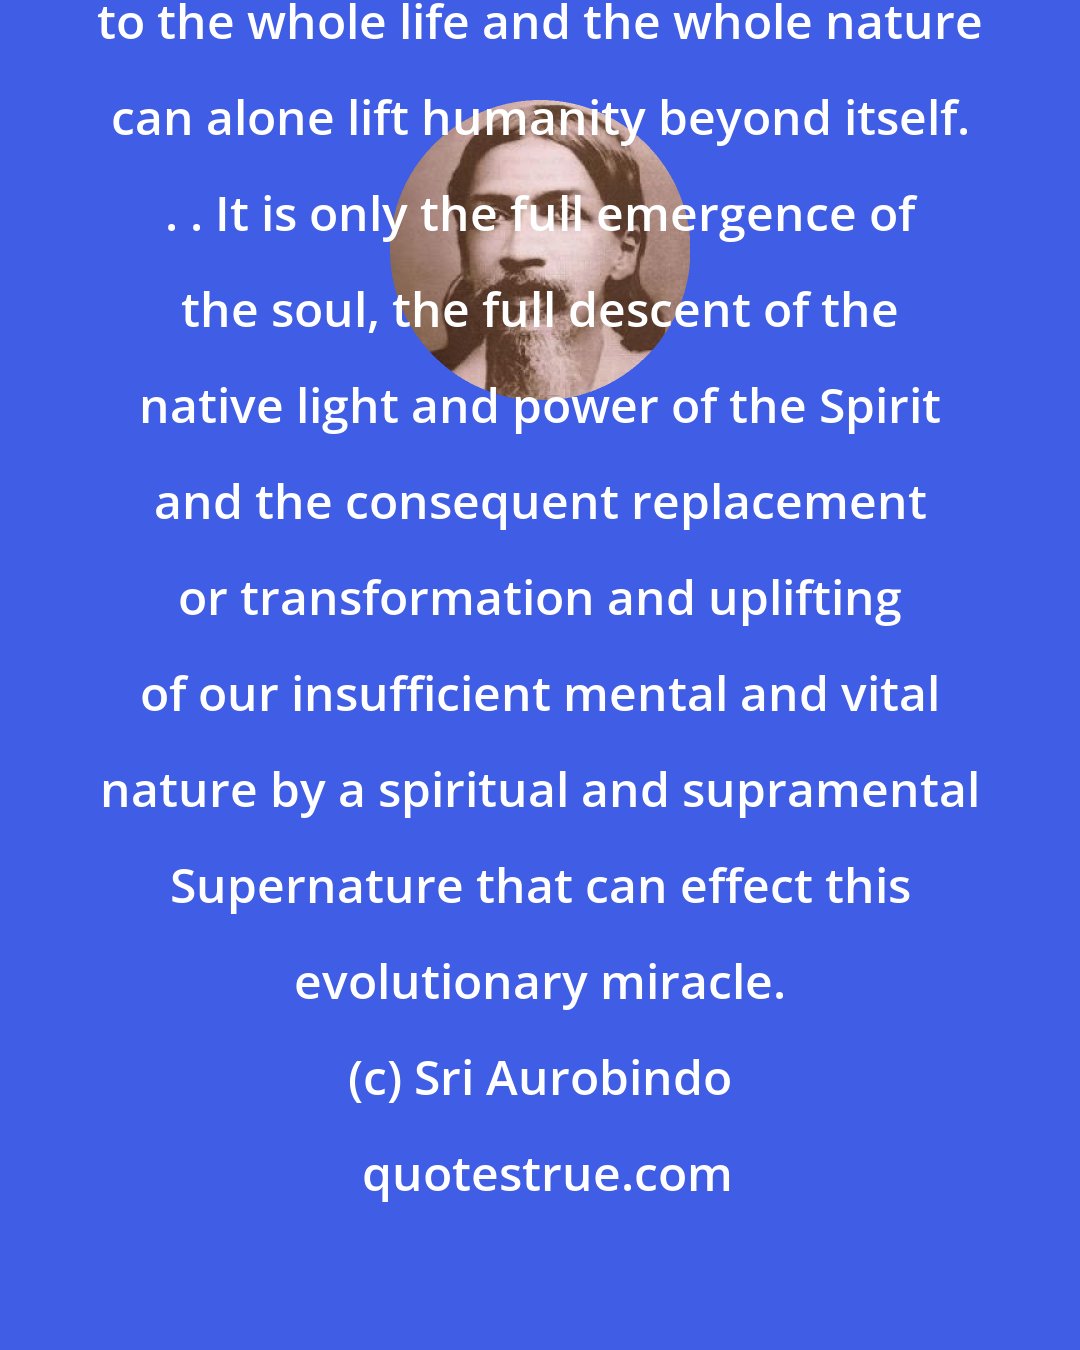 Sri Aurobindo: A total spiritual direction given to the whole life and the whole nature can alone lift humanity beyond itself. . . It is only the full emergence of the soul, the full descent of the native light and power of the Spirit and the consequent replacement or transformation and uplifting of our insufficient mental and vital nature by a spiritual and supramental Supernature that can effect this evolutionary miracle.